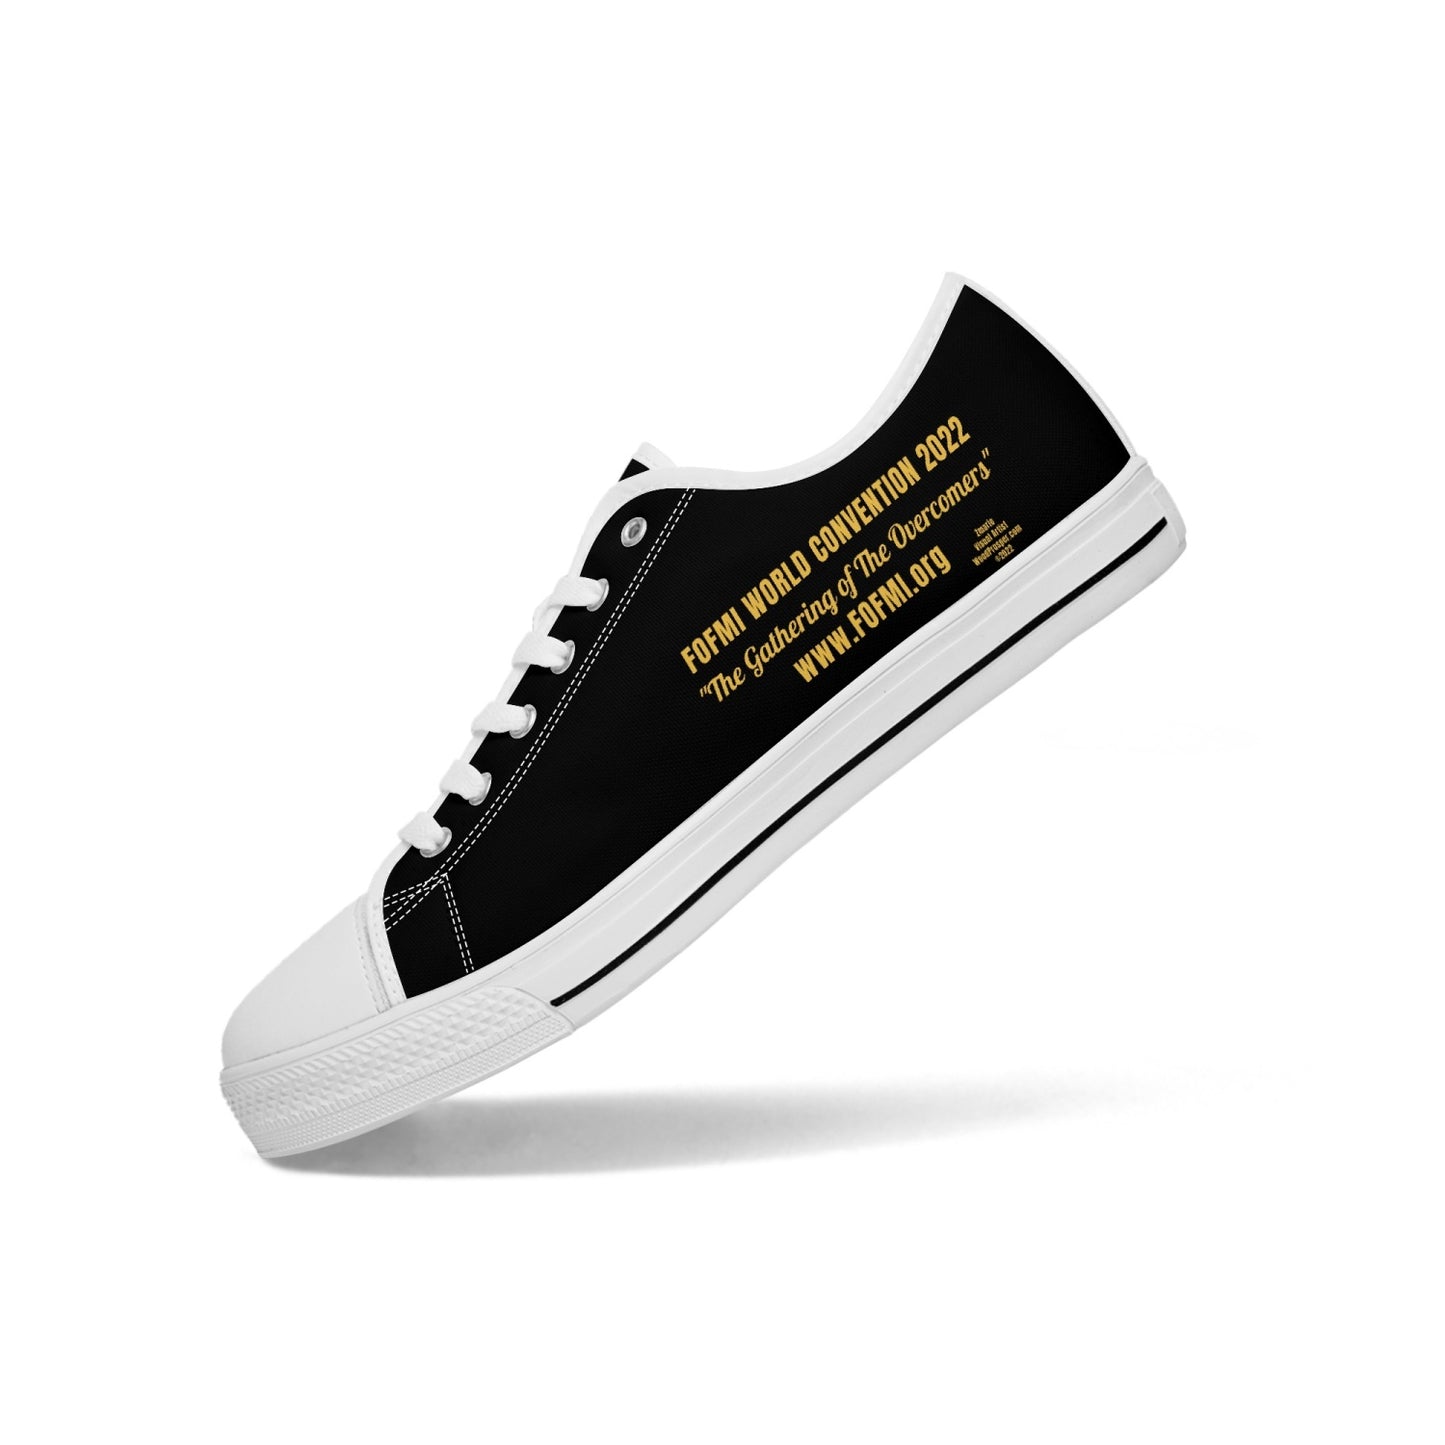 FOFMI World Convention 2022 Low-top Canvas Shoes